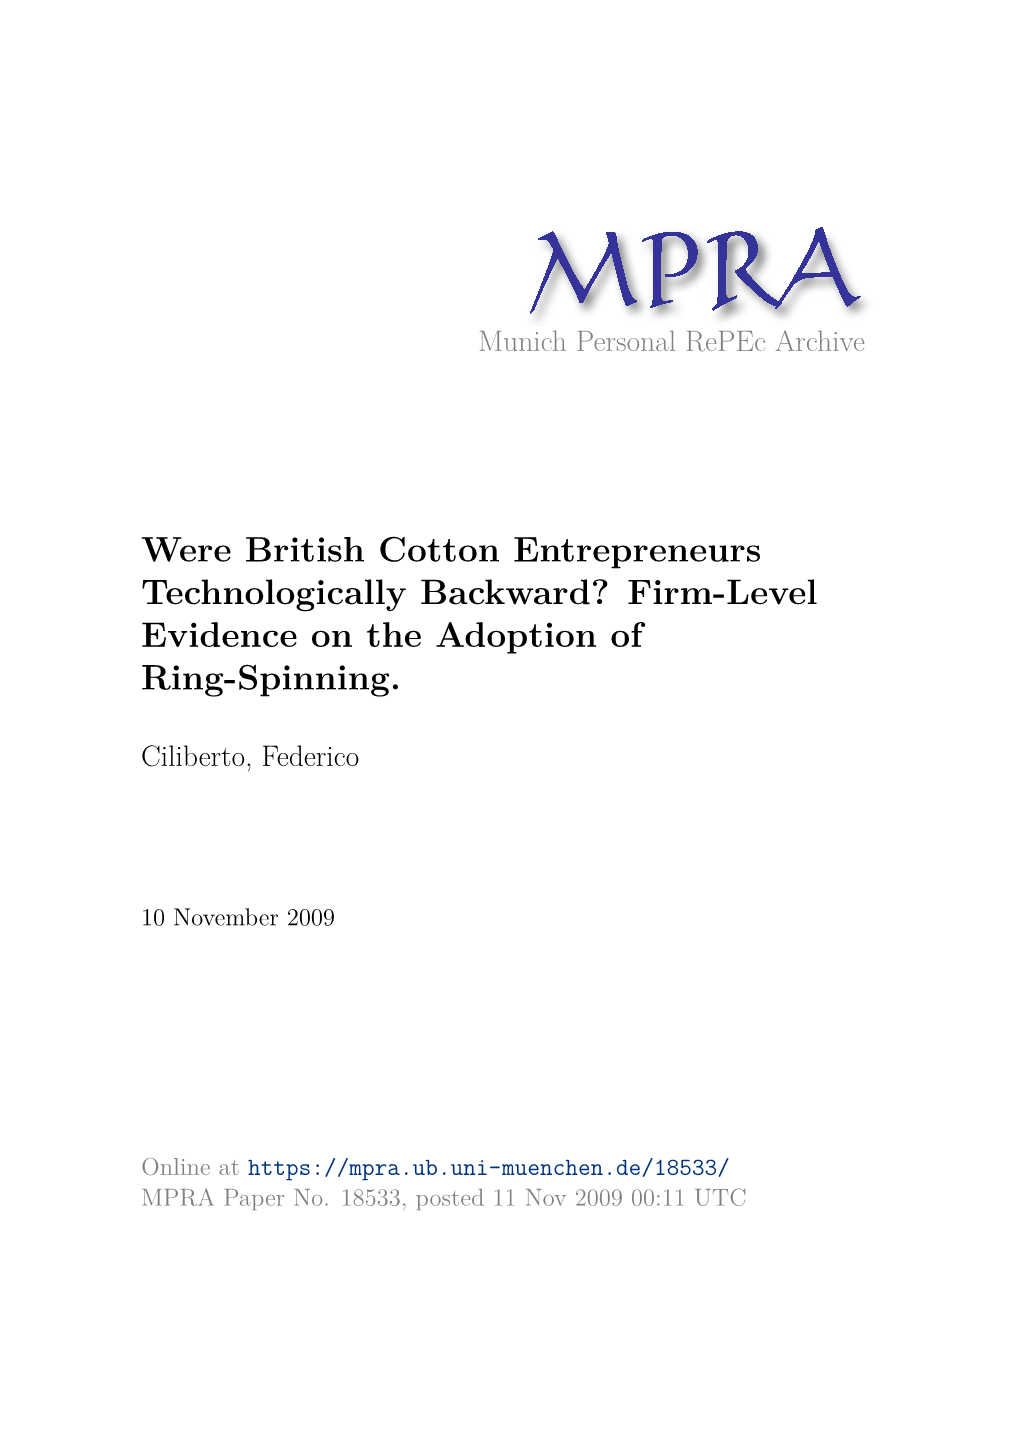 Were British Cotton Entrepreneurs Technologically Backward? Firm-Level Evidence on the Adoption of Ring-Spinning